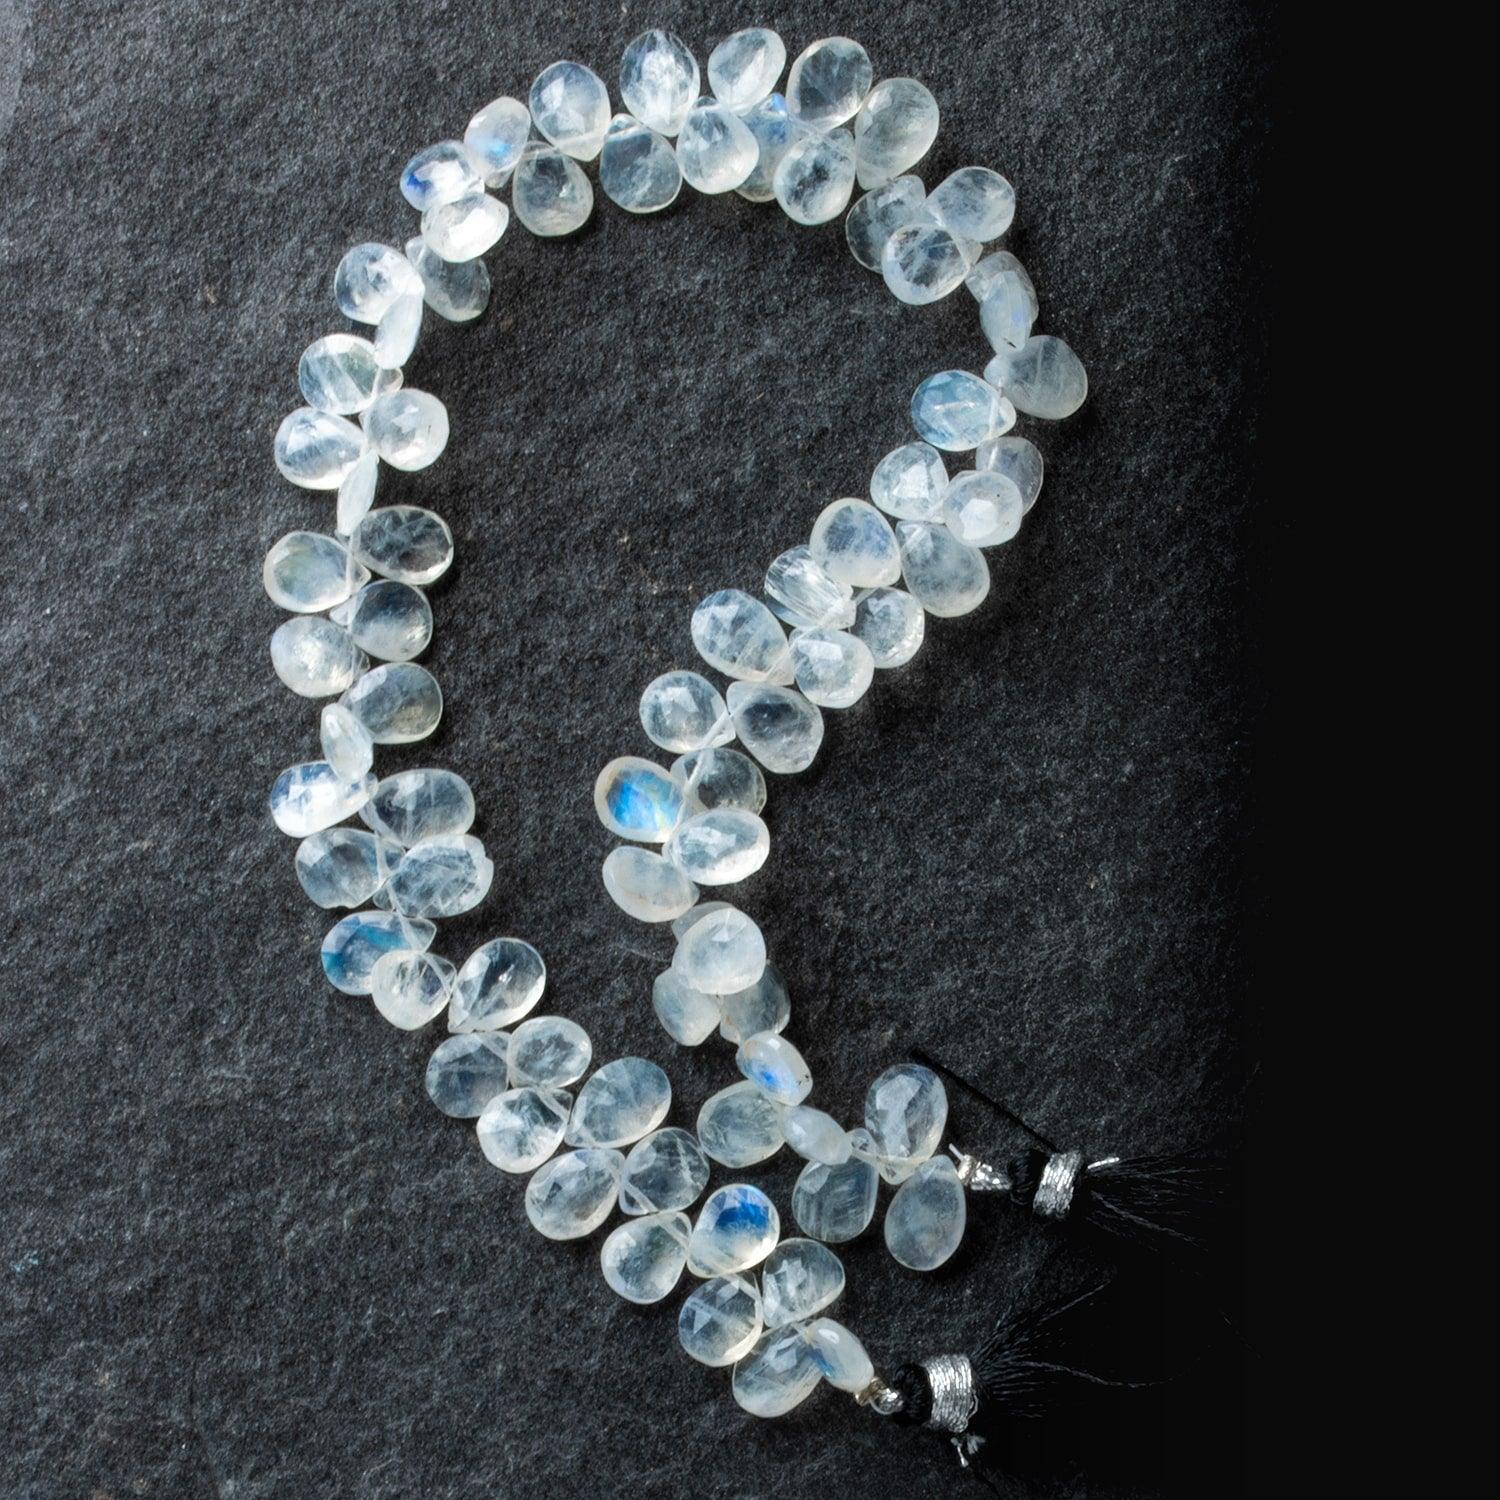 Top Grade Natural Faceted Rainbow Moonstone Beads Necklace 16 Inch  Necklace